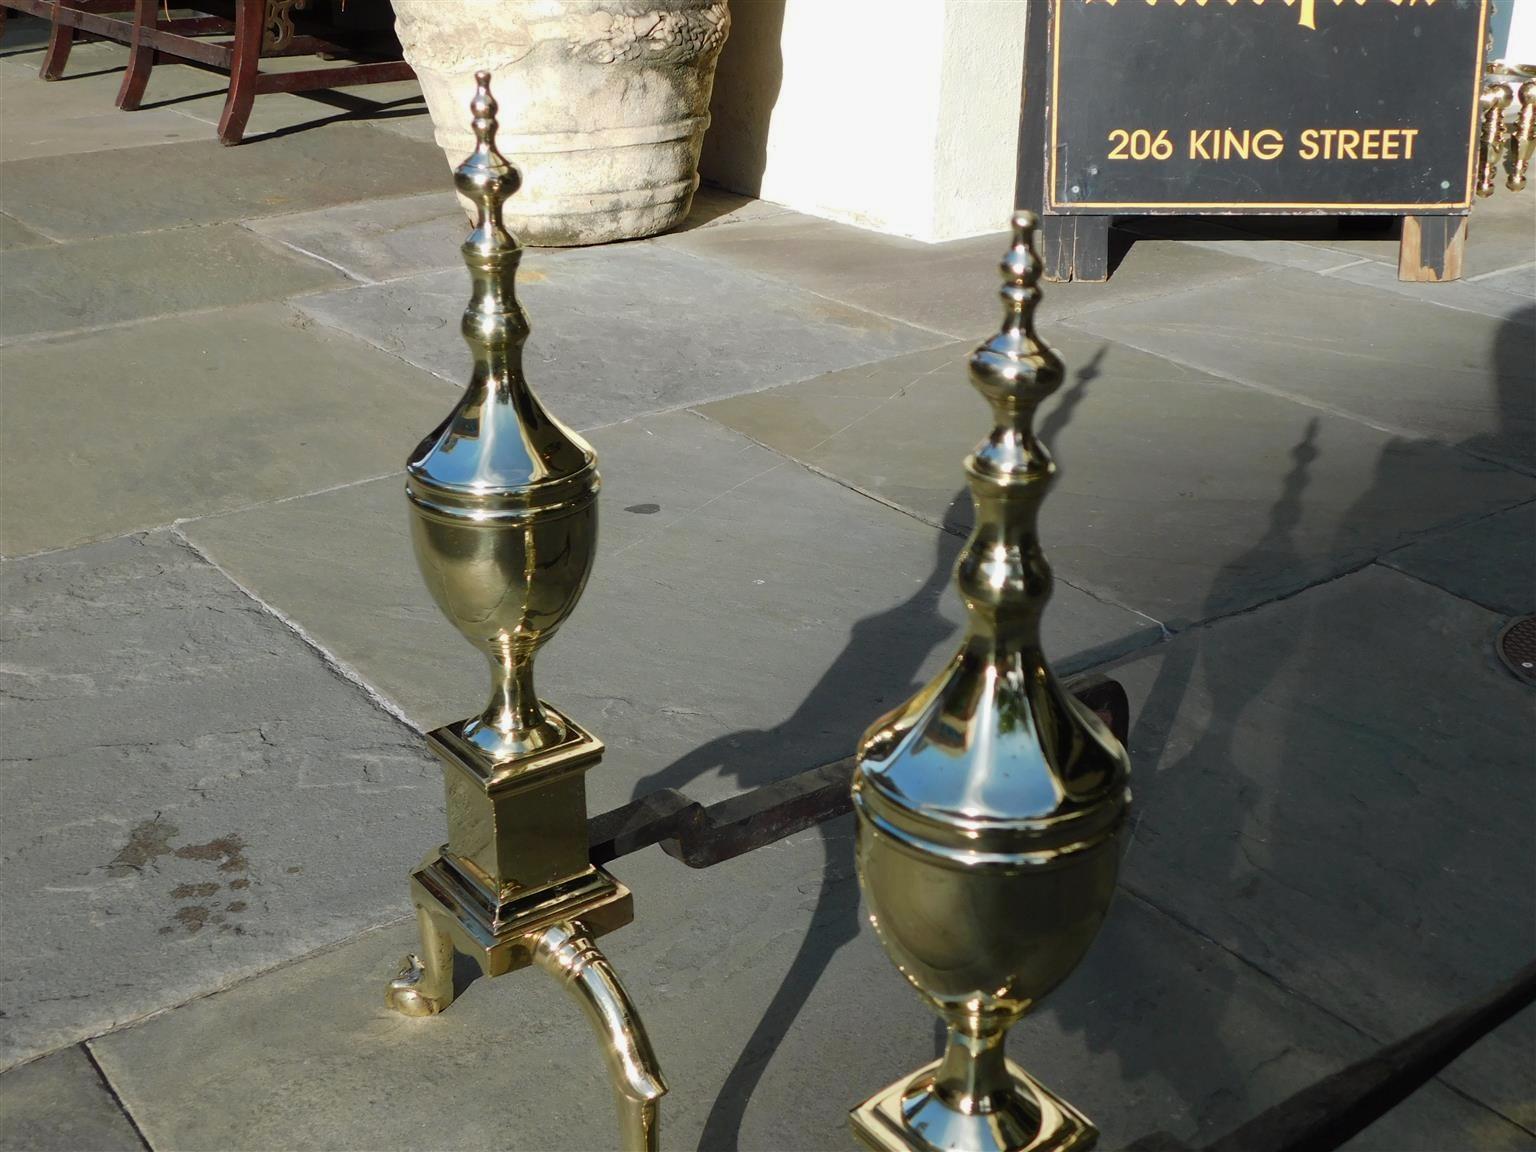 Cast Pair of American Brass Urn Finial Andirons with Ball and Claw Feet, Phil, C 1790 For Sale